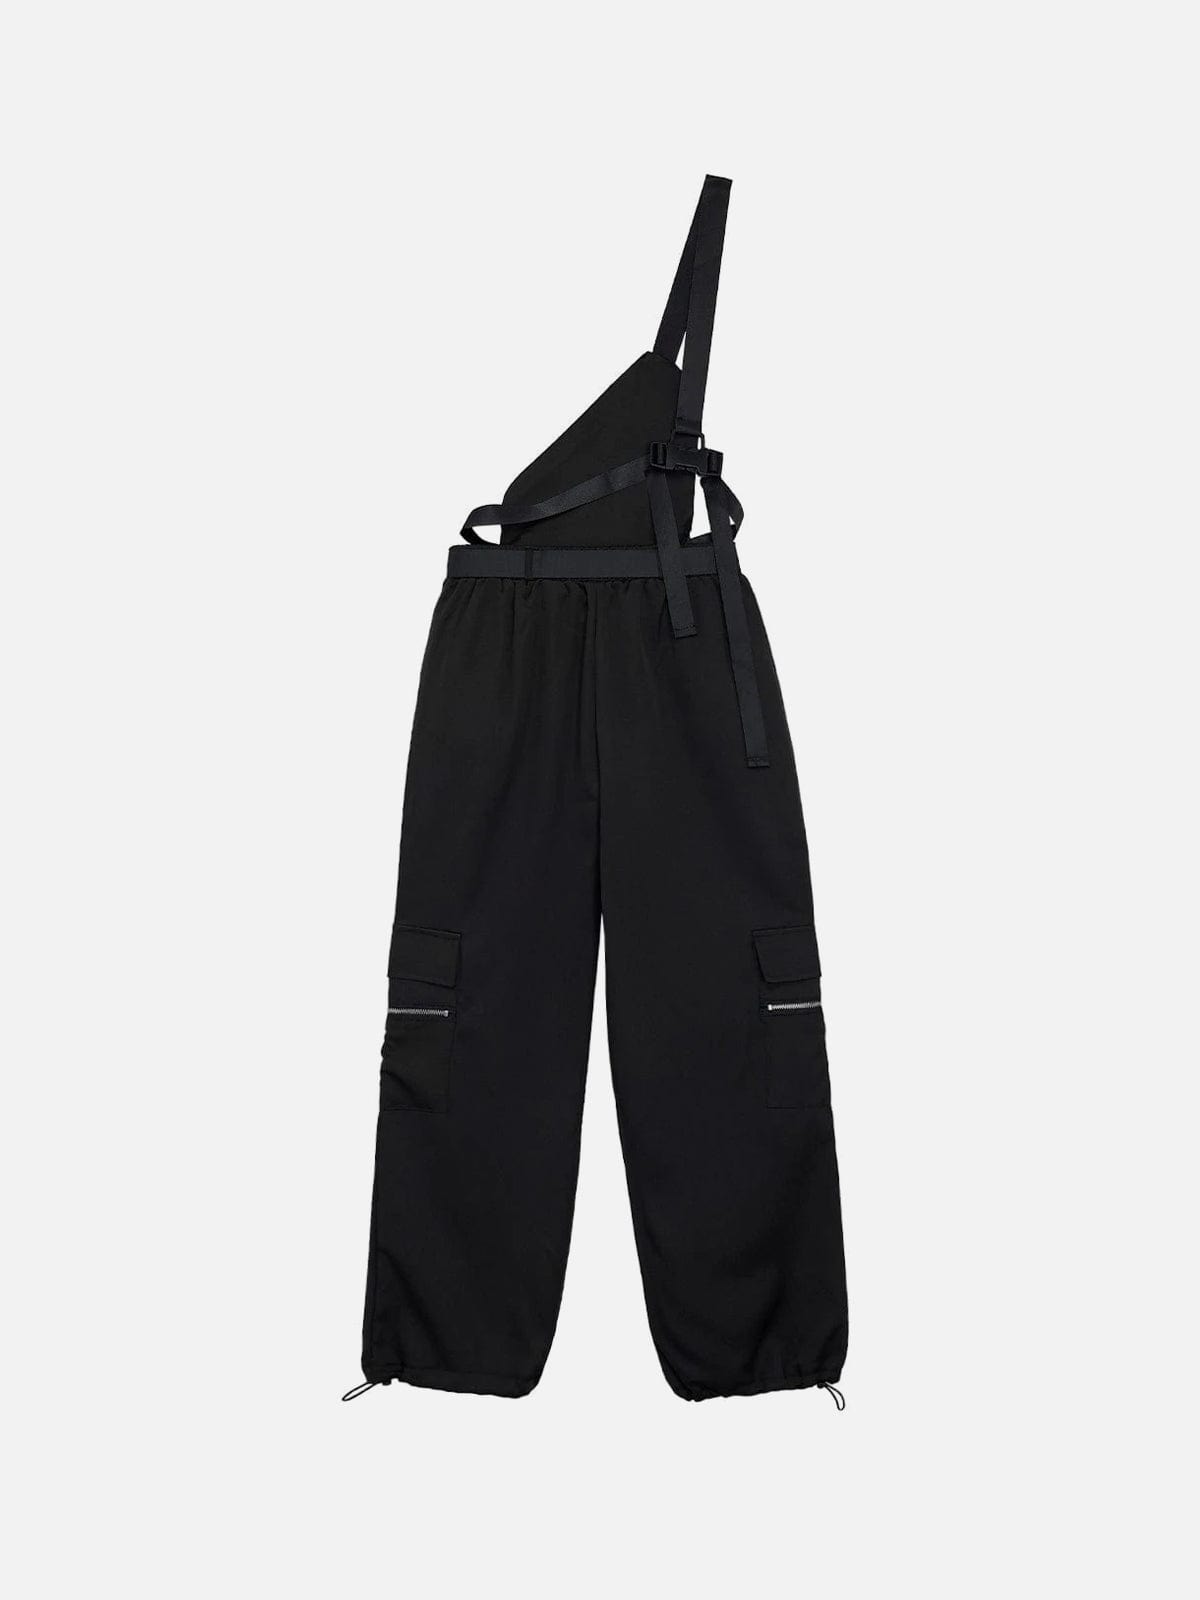 TO Detechable Personalized Buckle Belted Overalls